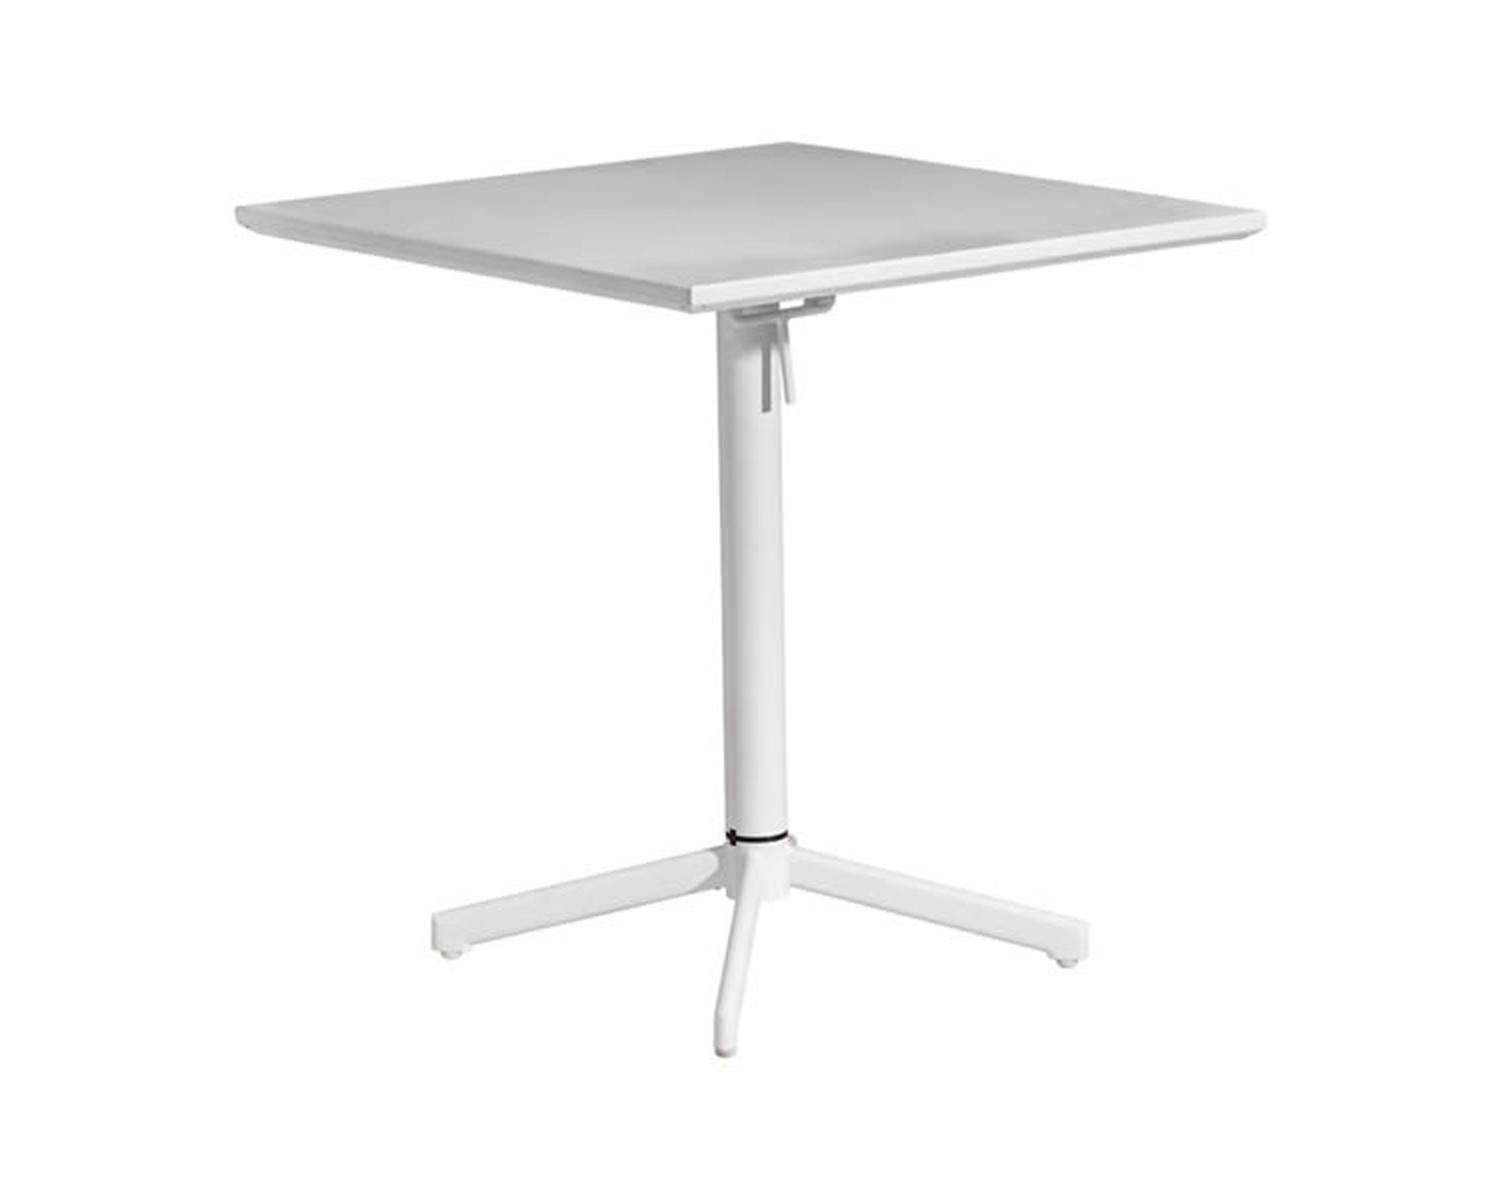 Zuo Modern Big Wave Square Folding Table - White